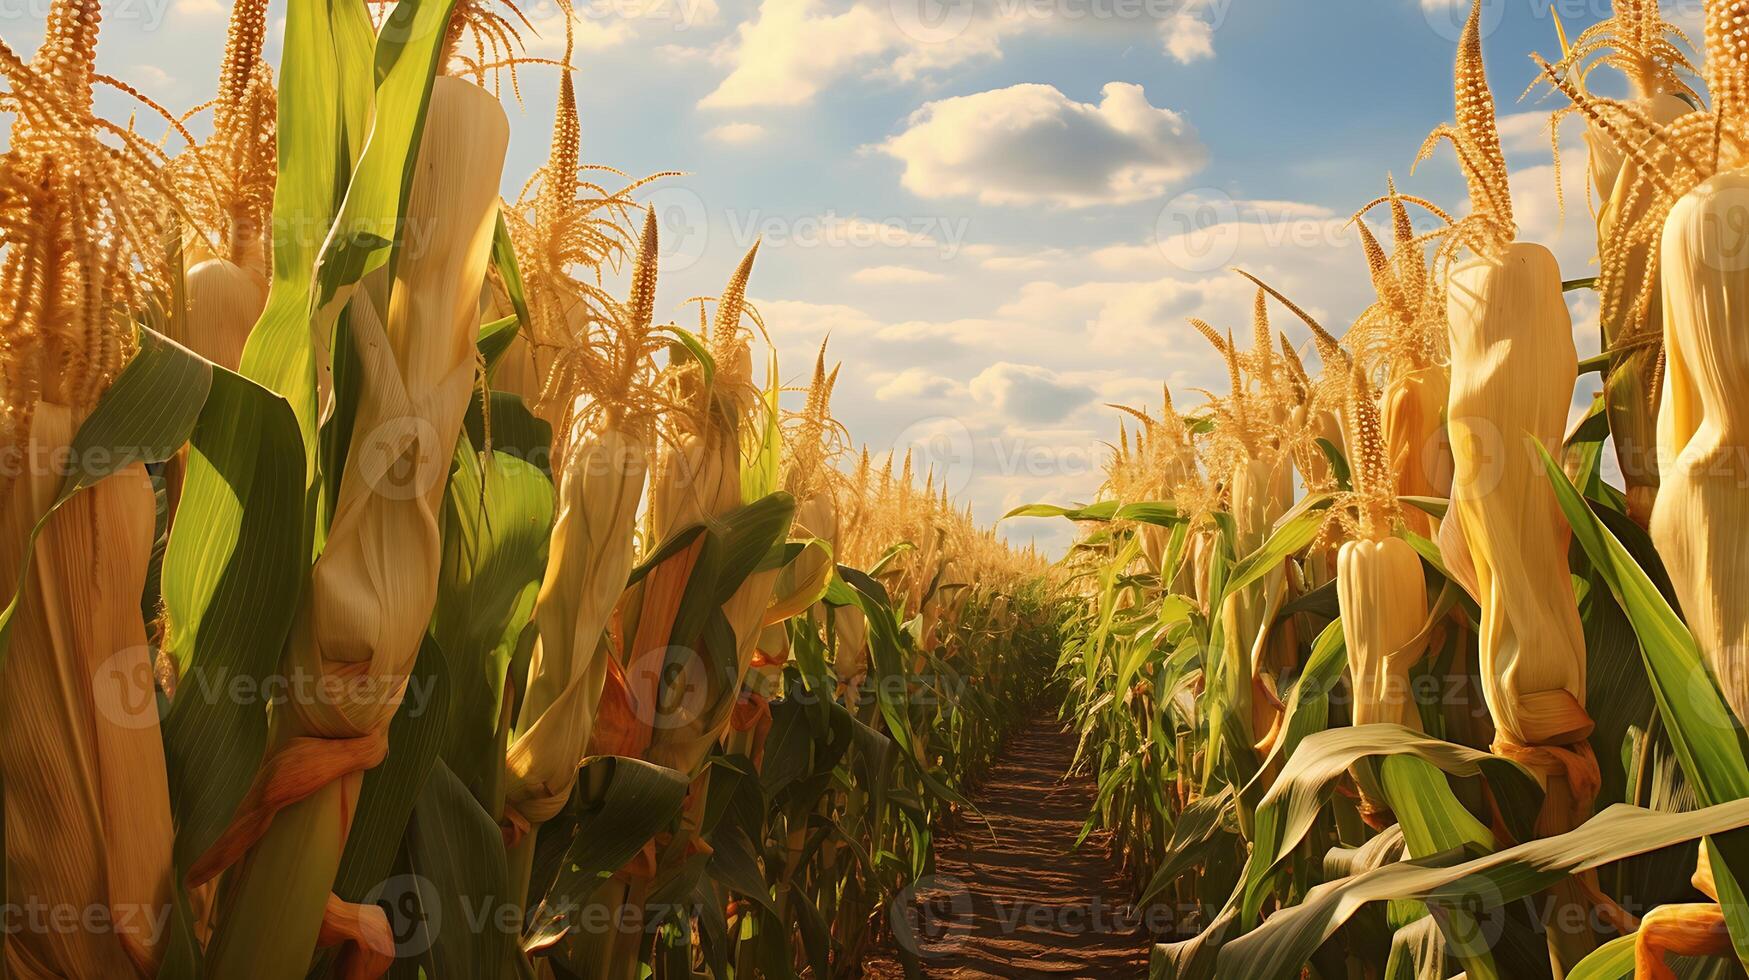 Corn field with blue sky and clouds photo